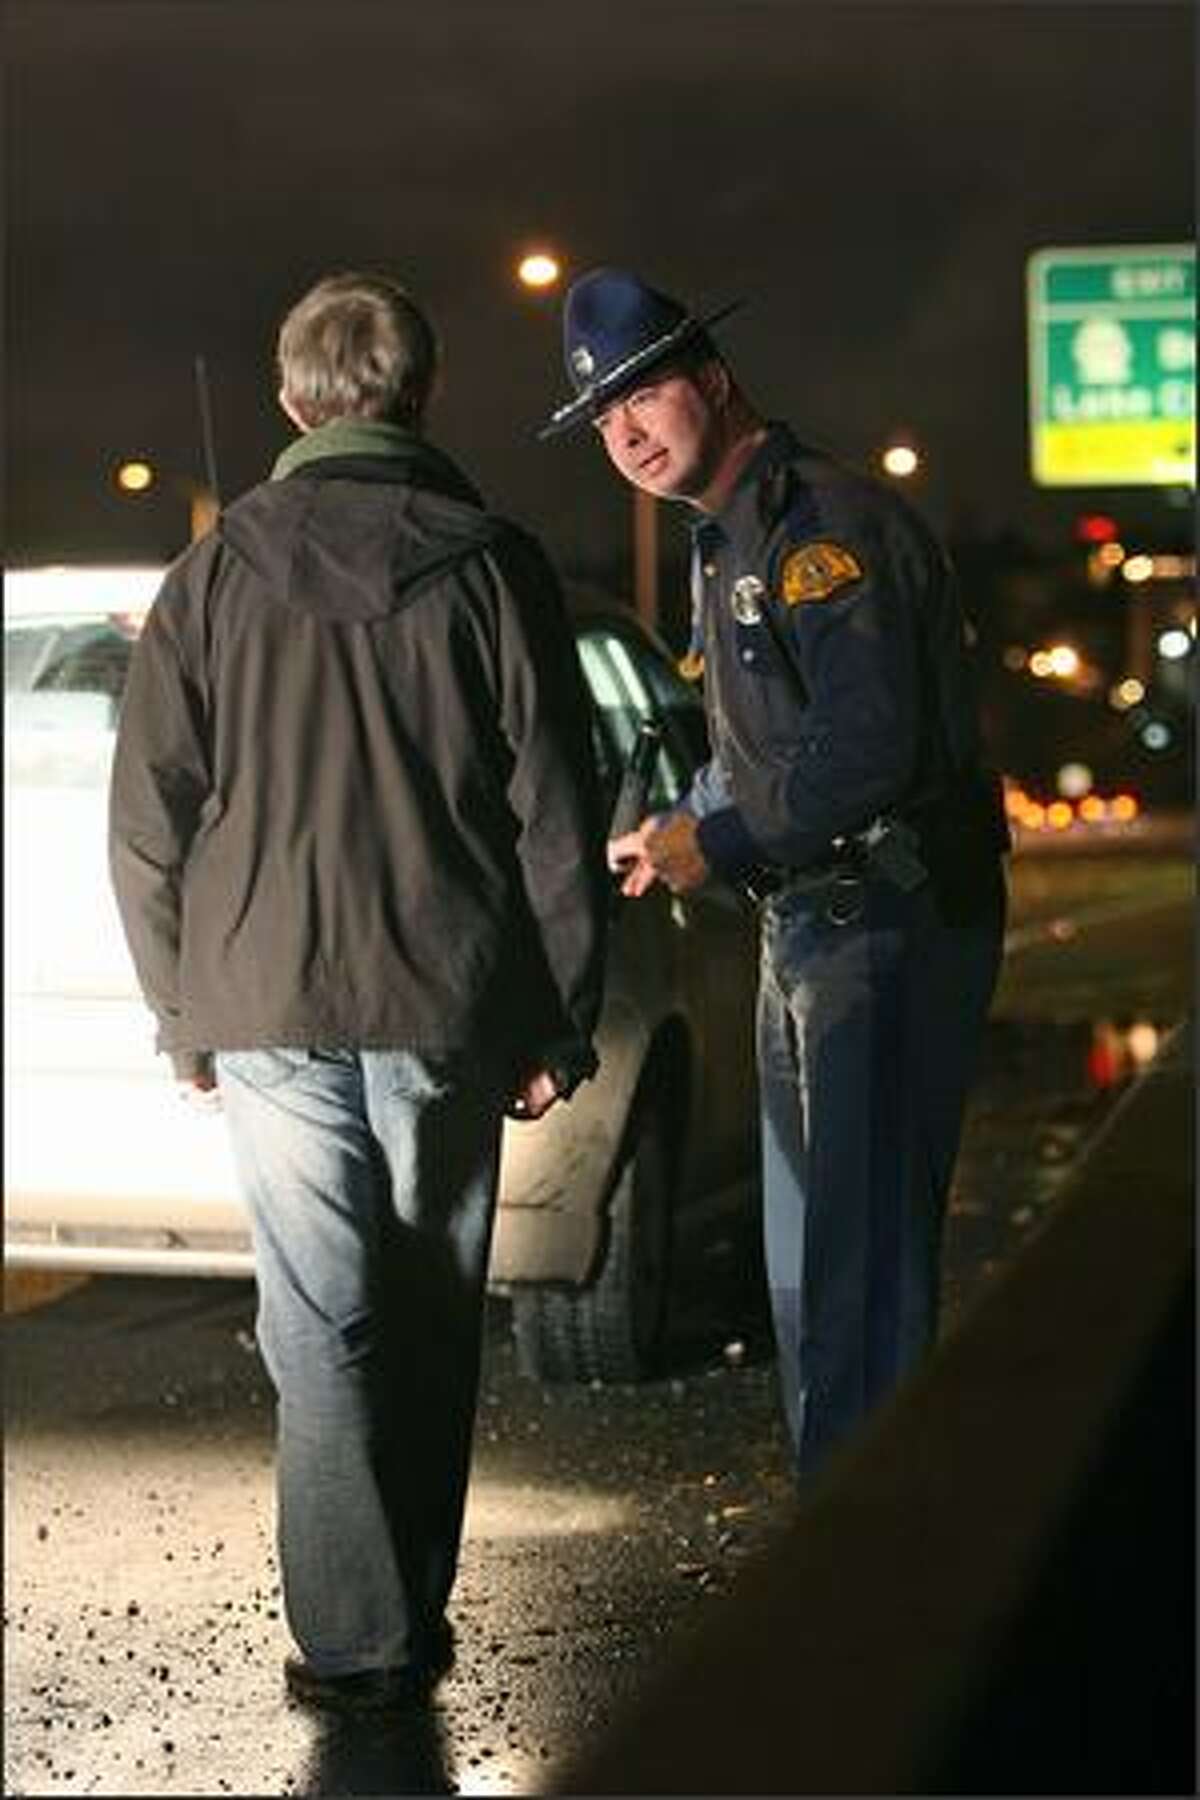 Washington State Patrol Trooper Joe Gannon administers a field sobriety test to a suspected drunk driver he pulled over on Interstate 5. The driver later blew a .156, almost double the legal limit, on the breath analyzer.